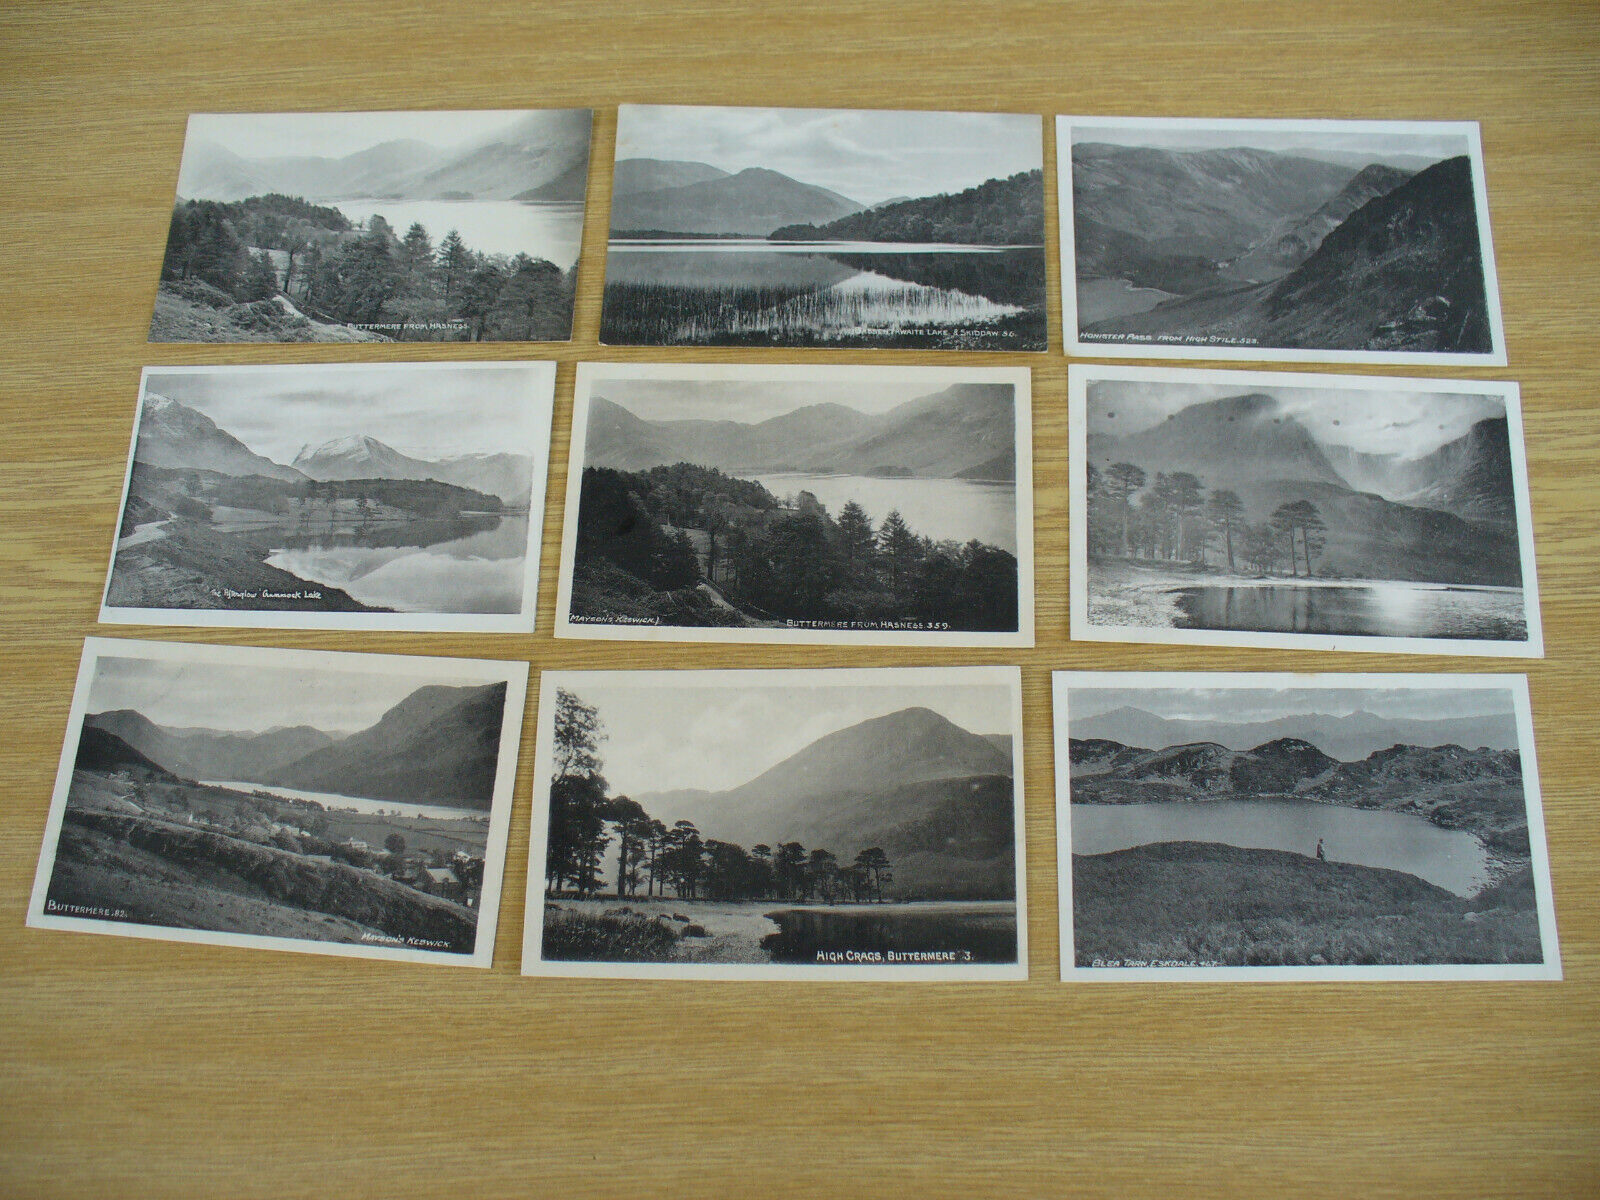 House Clearance - FIFTEEN VINTAGE MAYSONS POSTCARDS - CUMBRIA - GOOD MIX - ALL SHOWN.